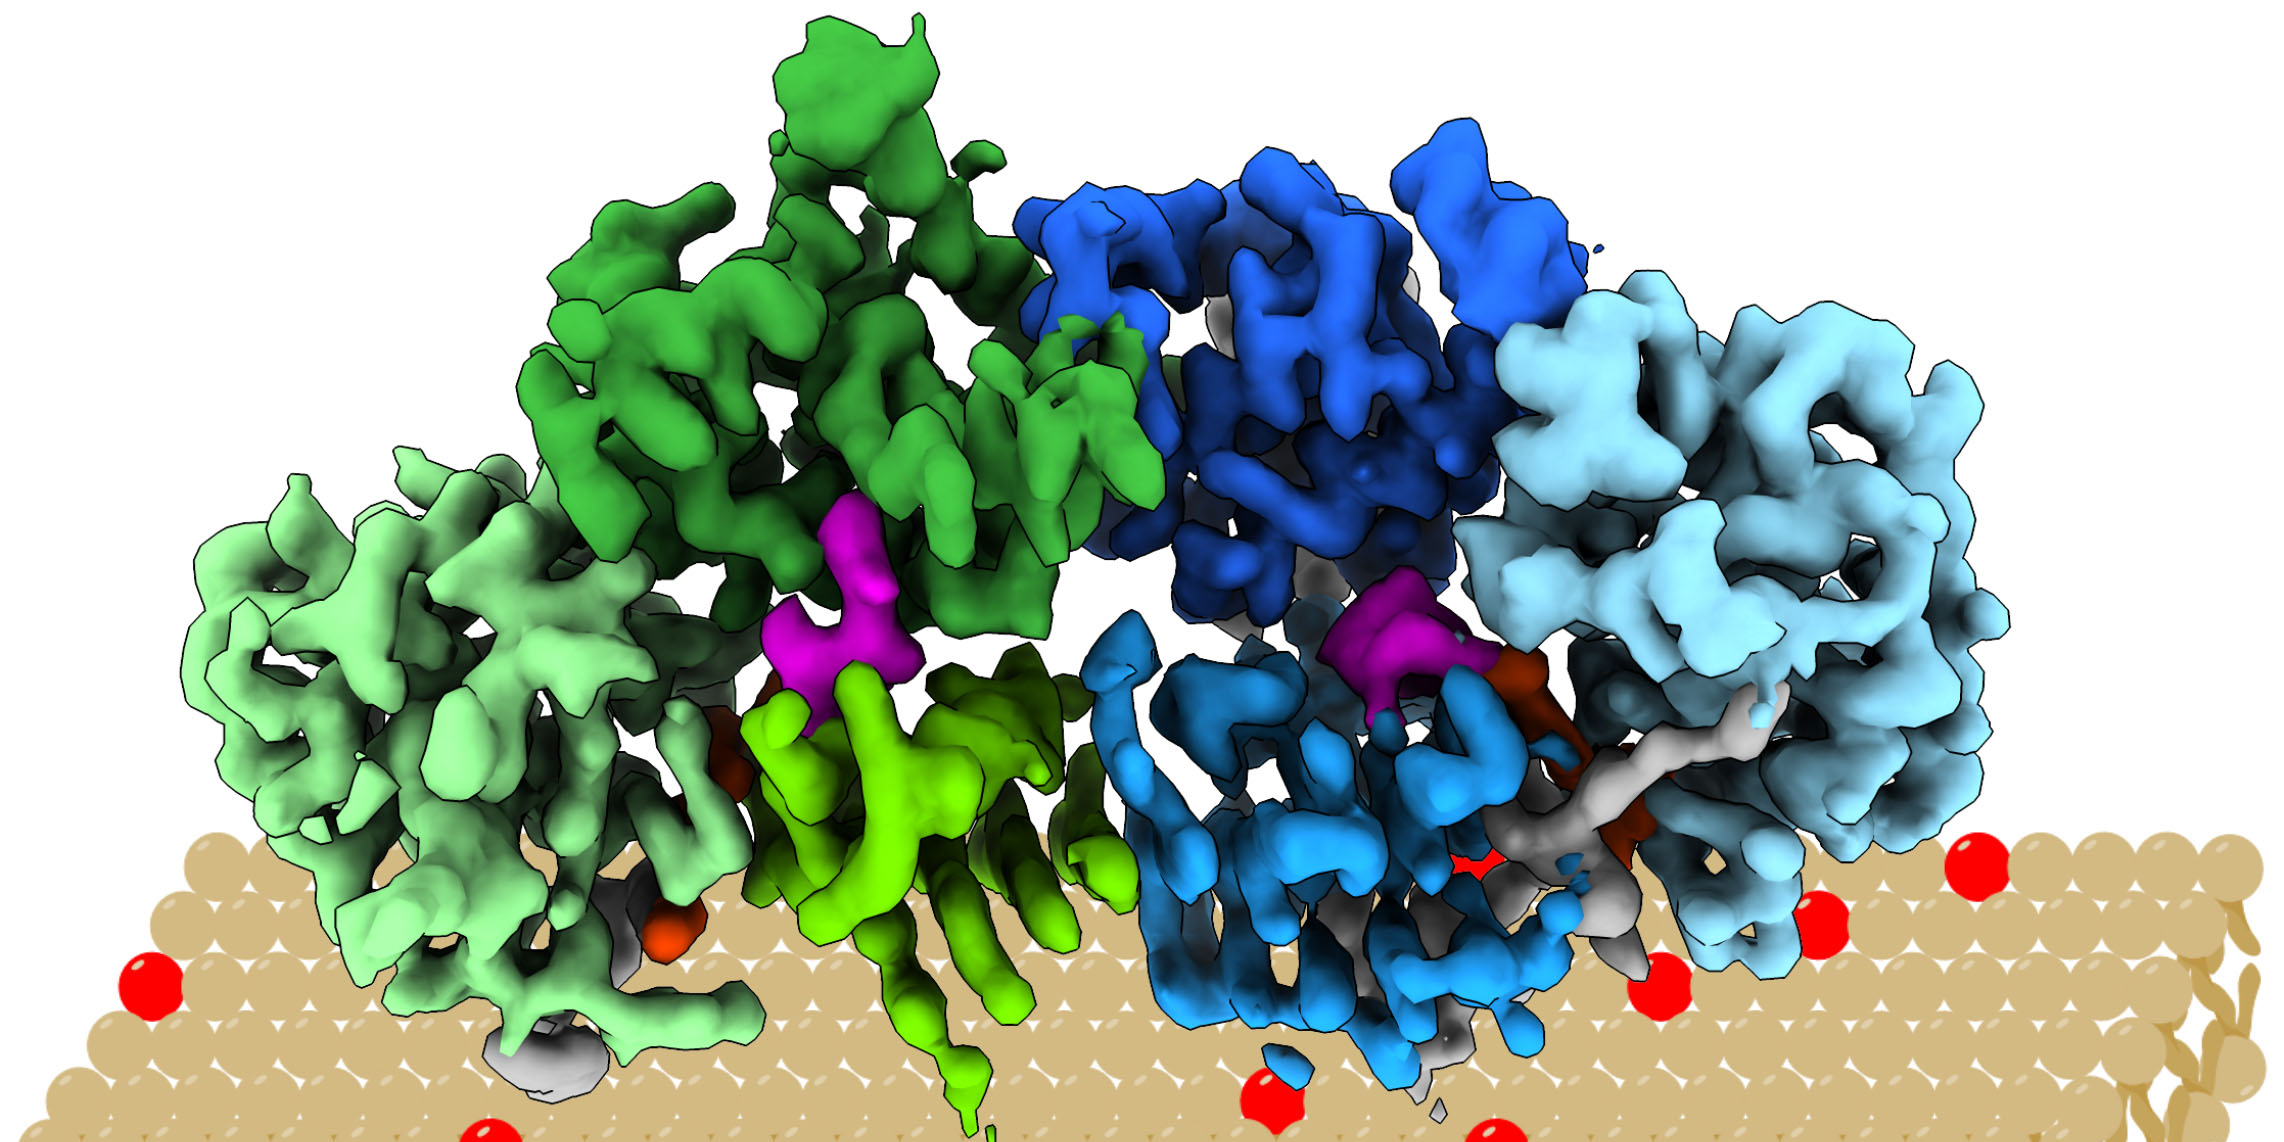 First 3D structure of regulator protein revealed